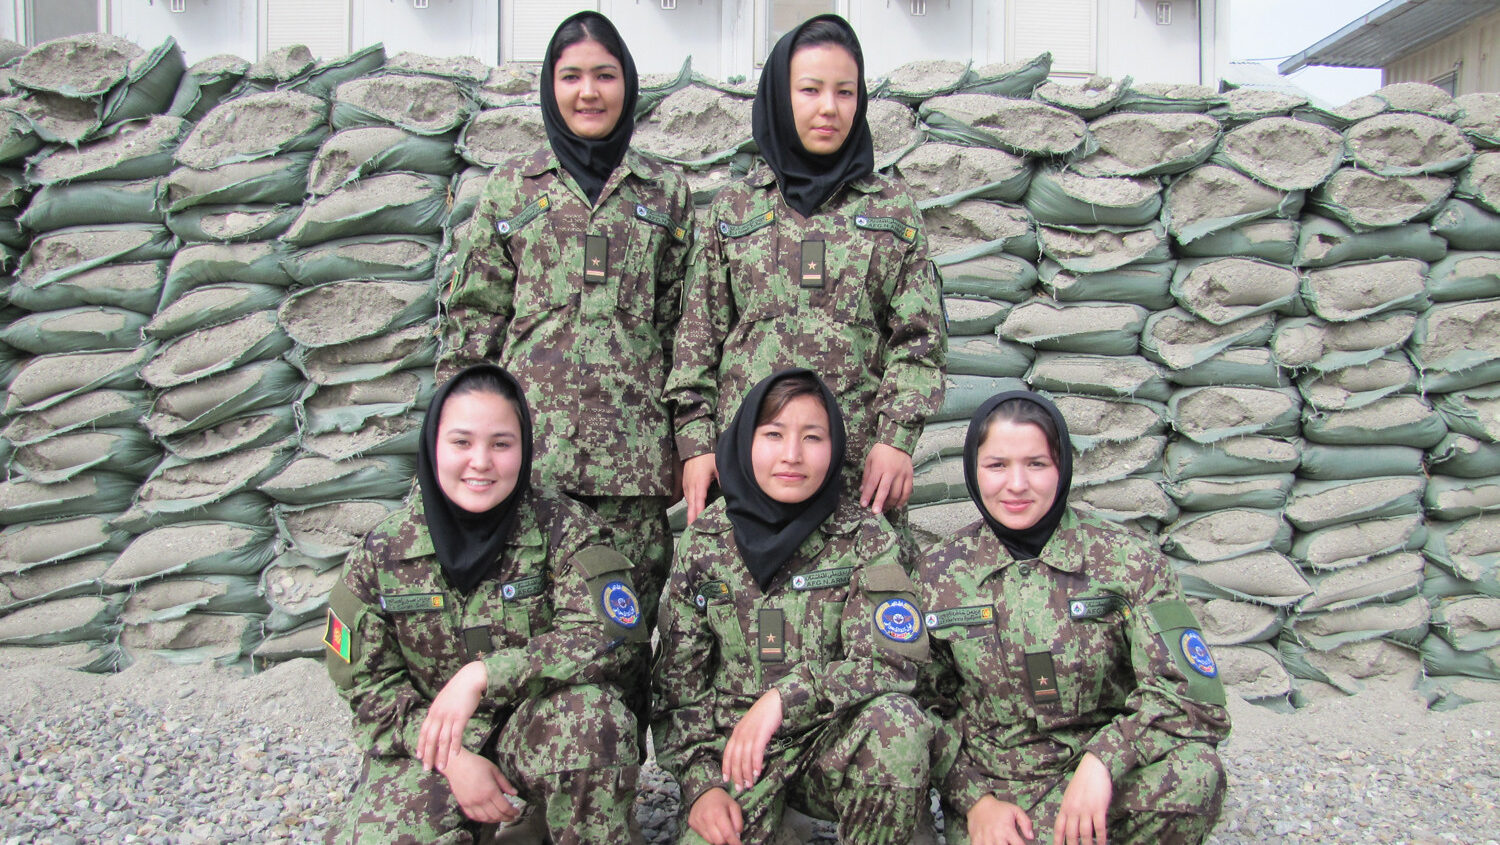 Broken Promises and Betrayal: Female Afghan Special Forces Abandoned by NATO, Left in Perilous Limbo